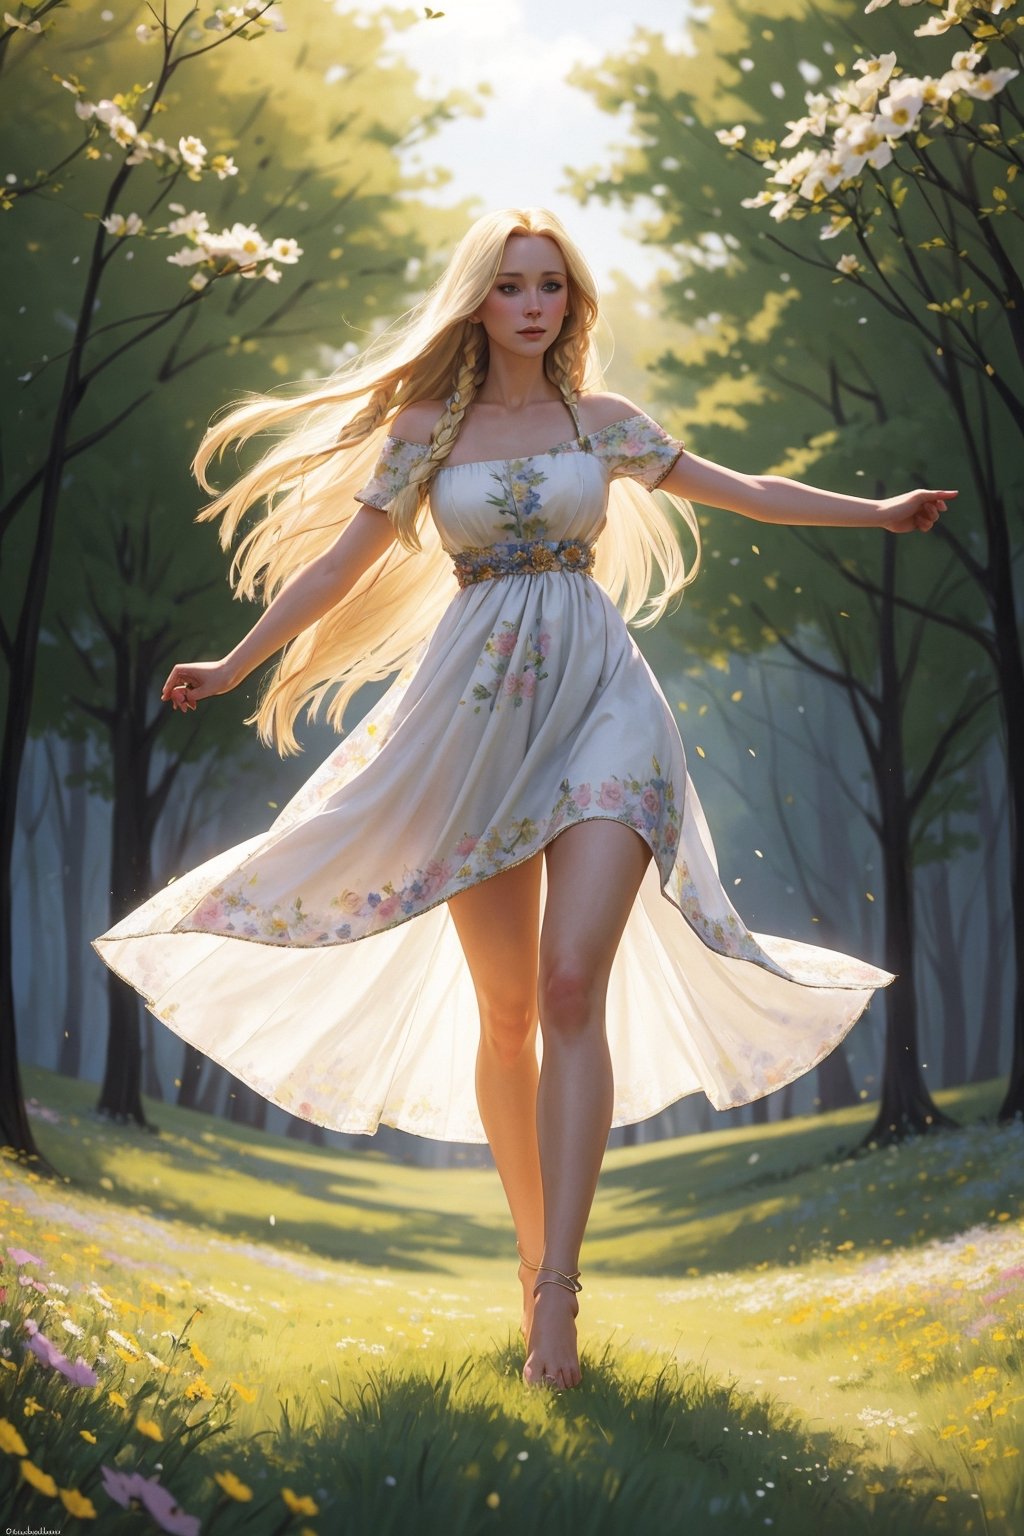 Portrait of a 25-year-old girl with long blonde hair, dressed in a dress made of light material, barefoot, standing in a meadow among flowers,  dynamic pose,

 brom's art, depiction of an epic fantasy character, portrait of a character, fantasy art, works by Richard Schmid, A.Mukha, Volegov, impressionism